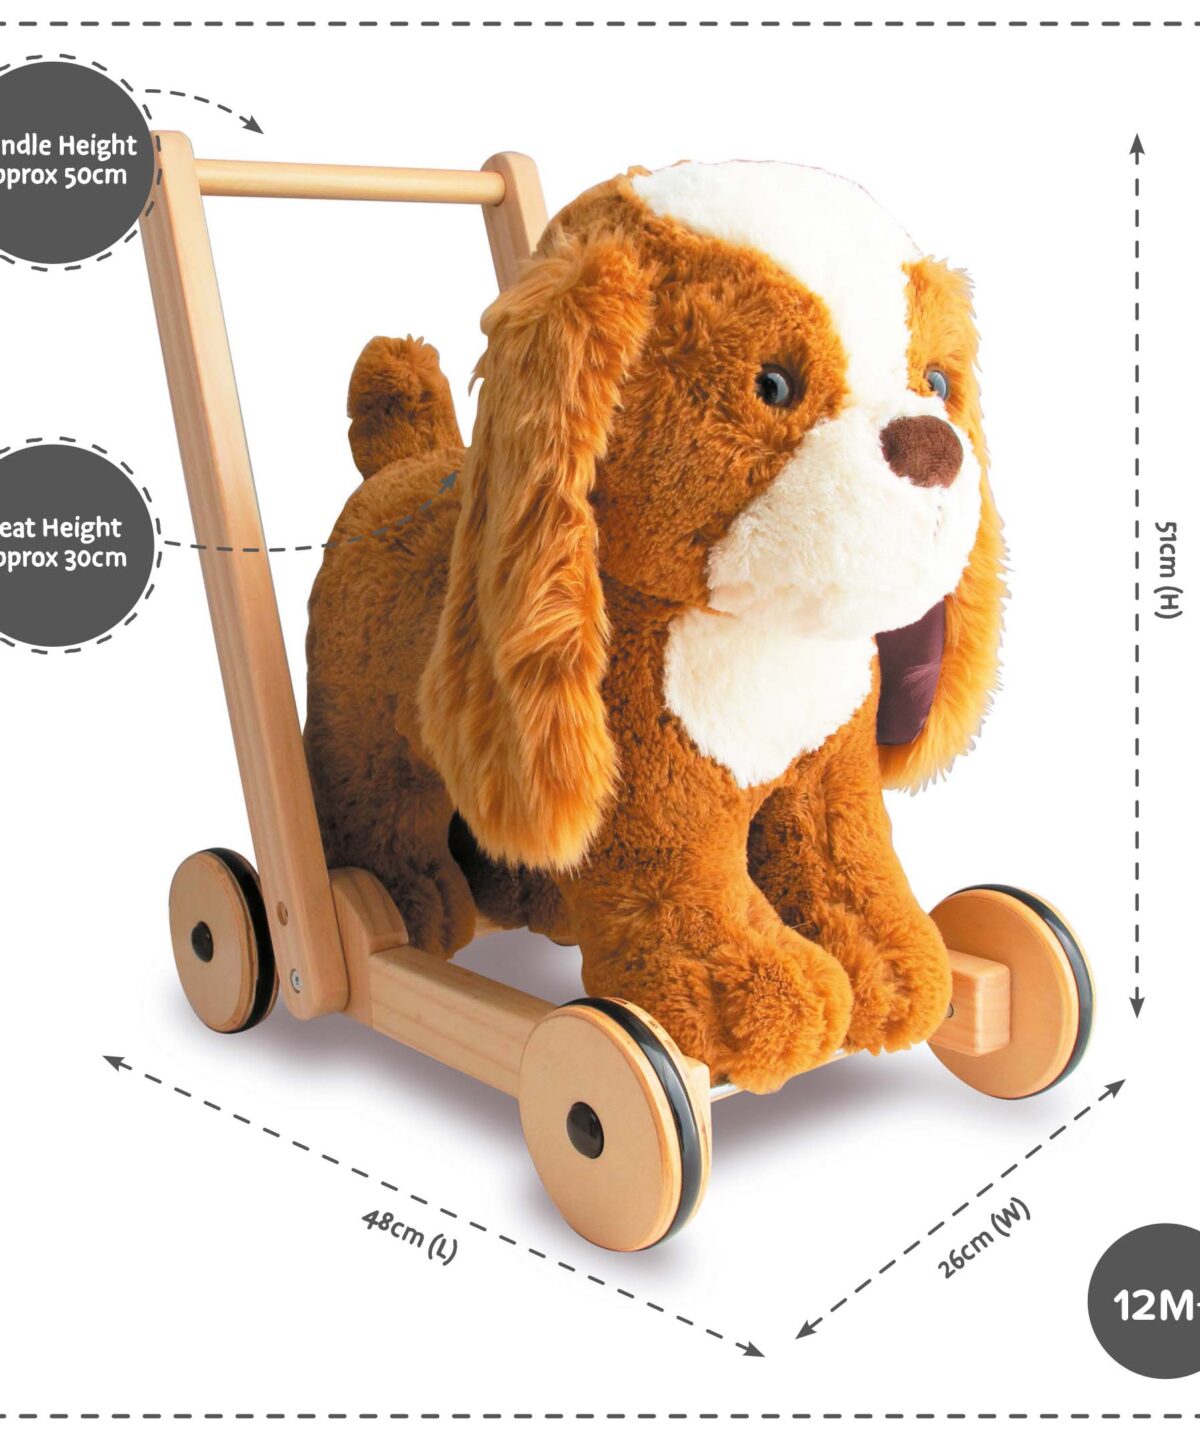 Product dimensions shown for Peanut Pup Baby walker 